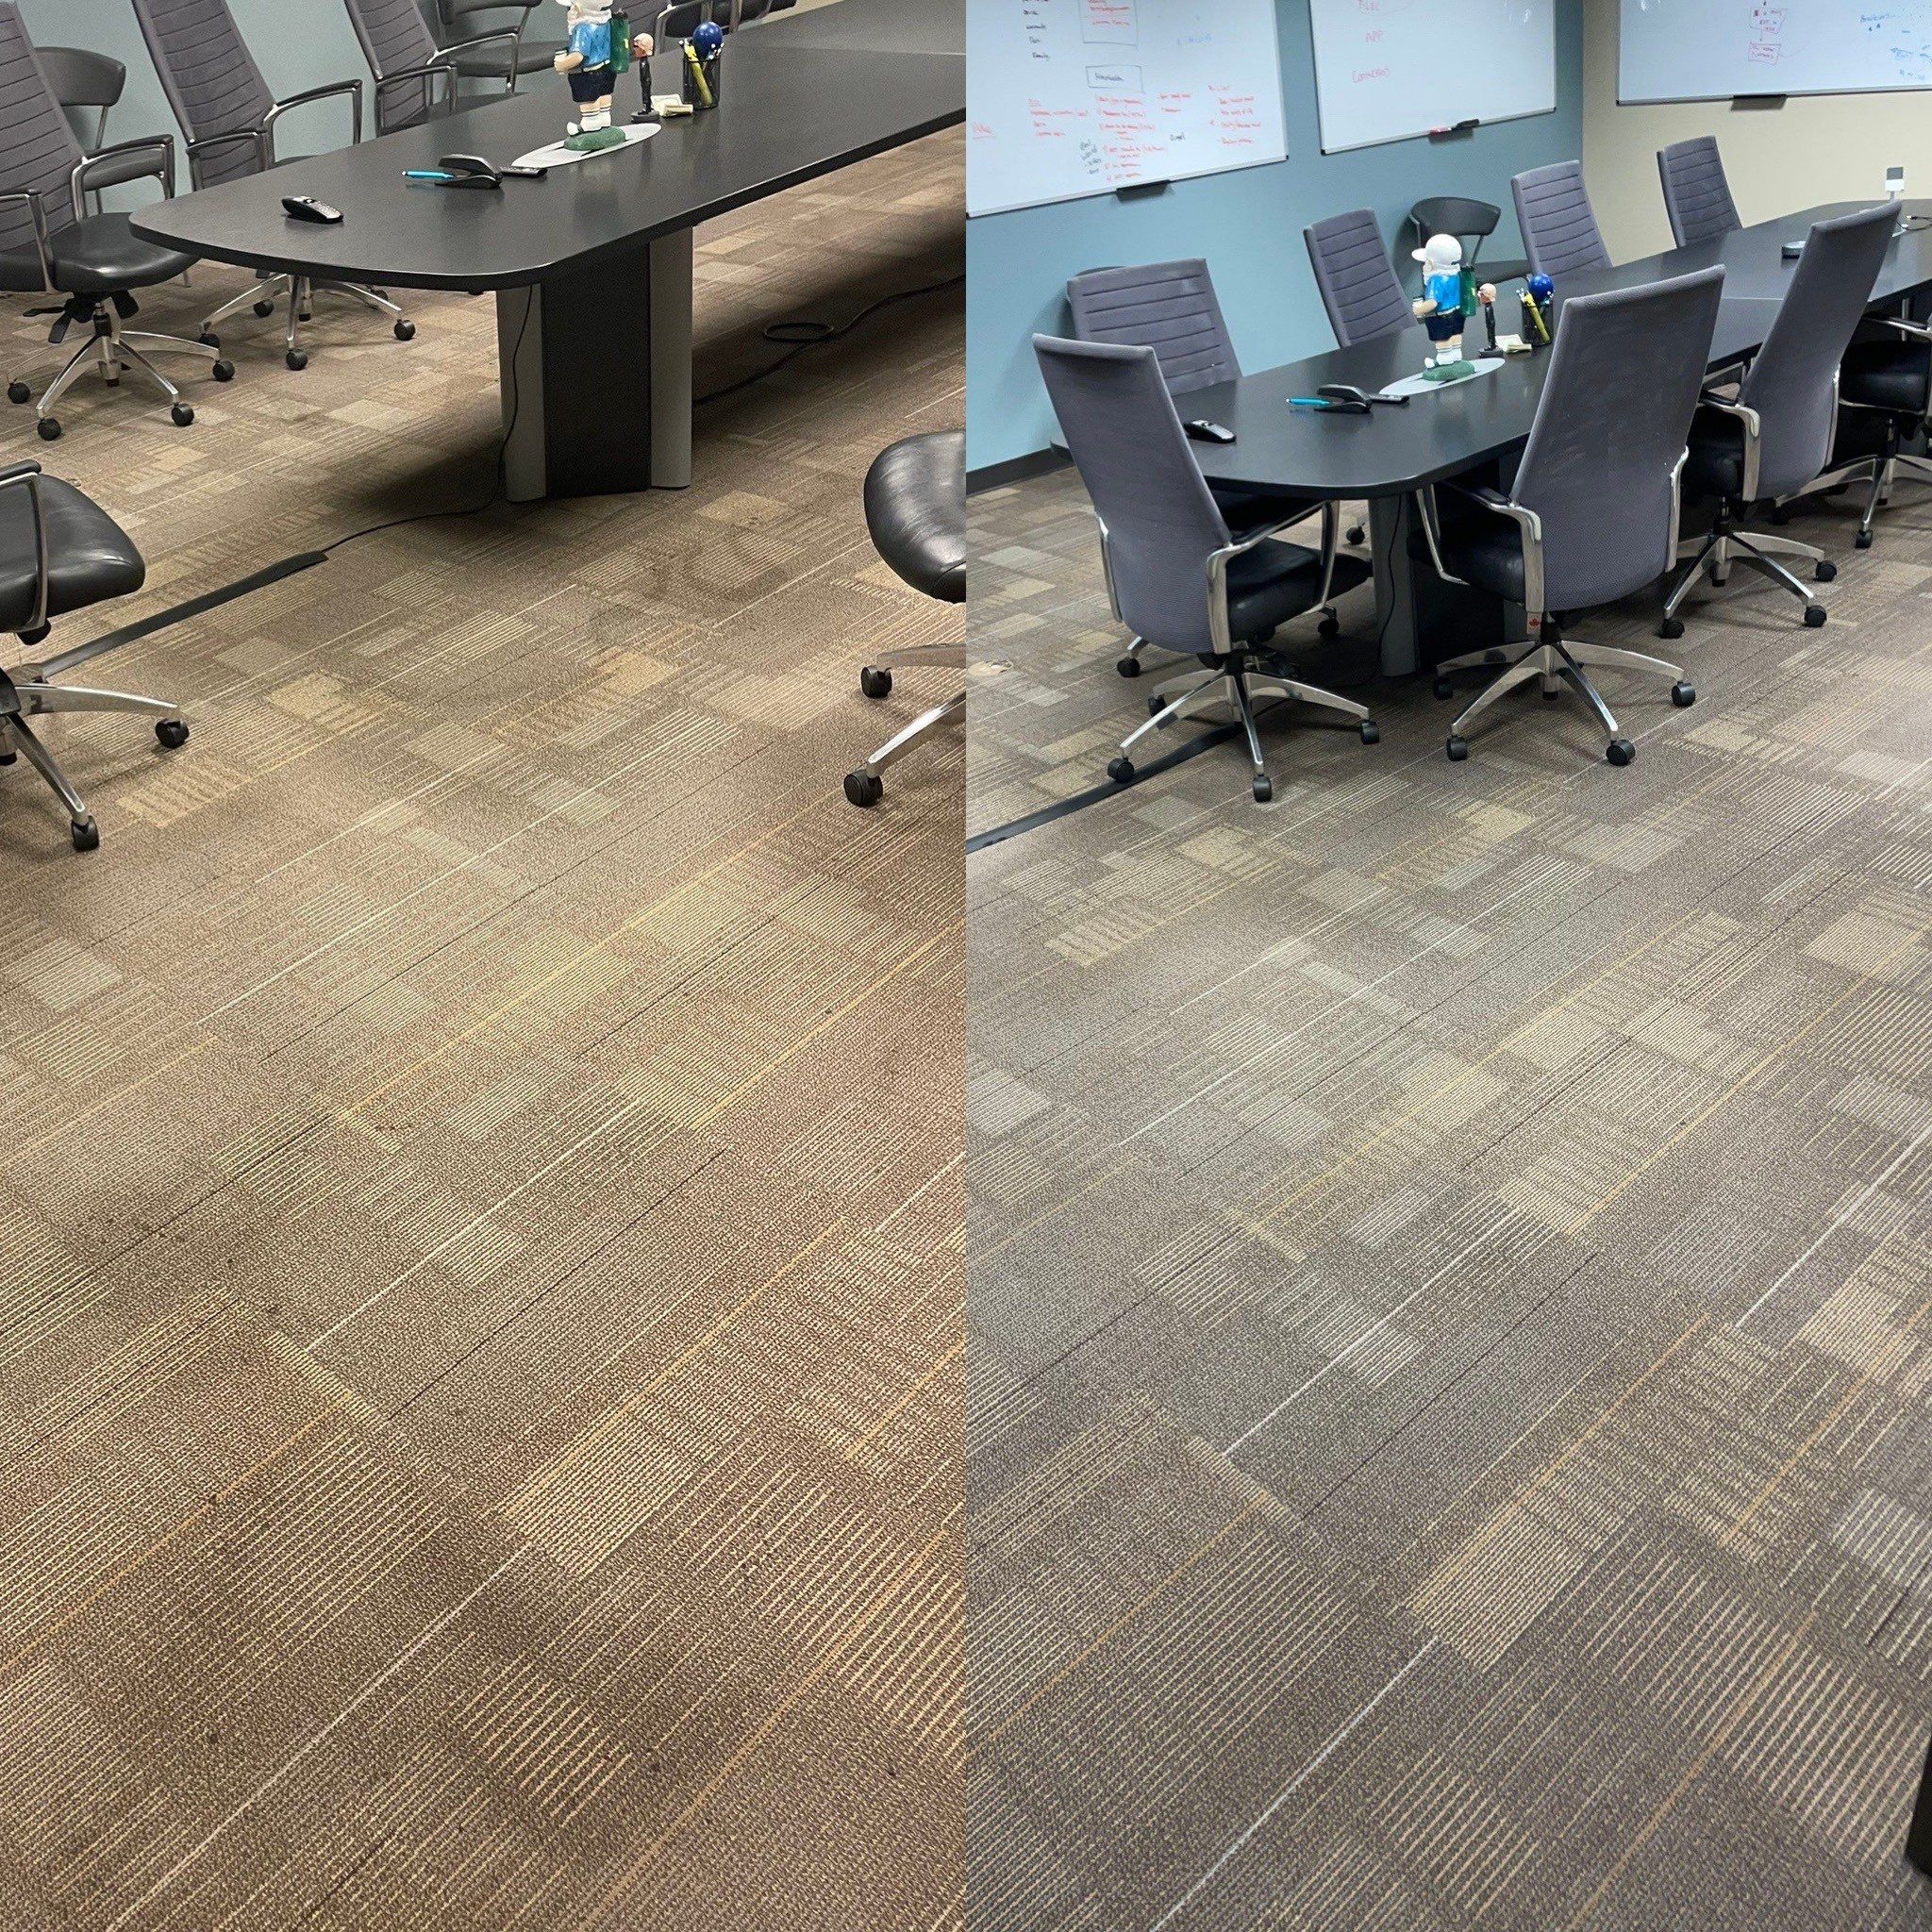 office carpet cleaning resulting in a visibly cleaner appearance in a conference room setting